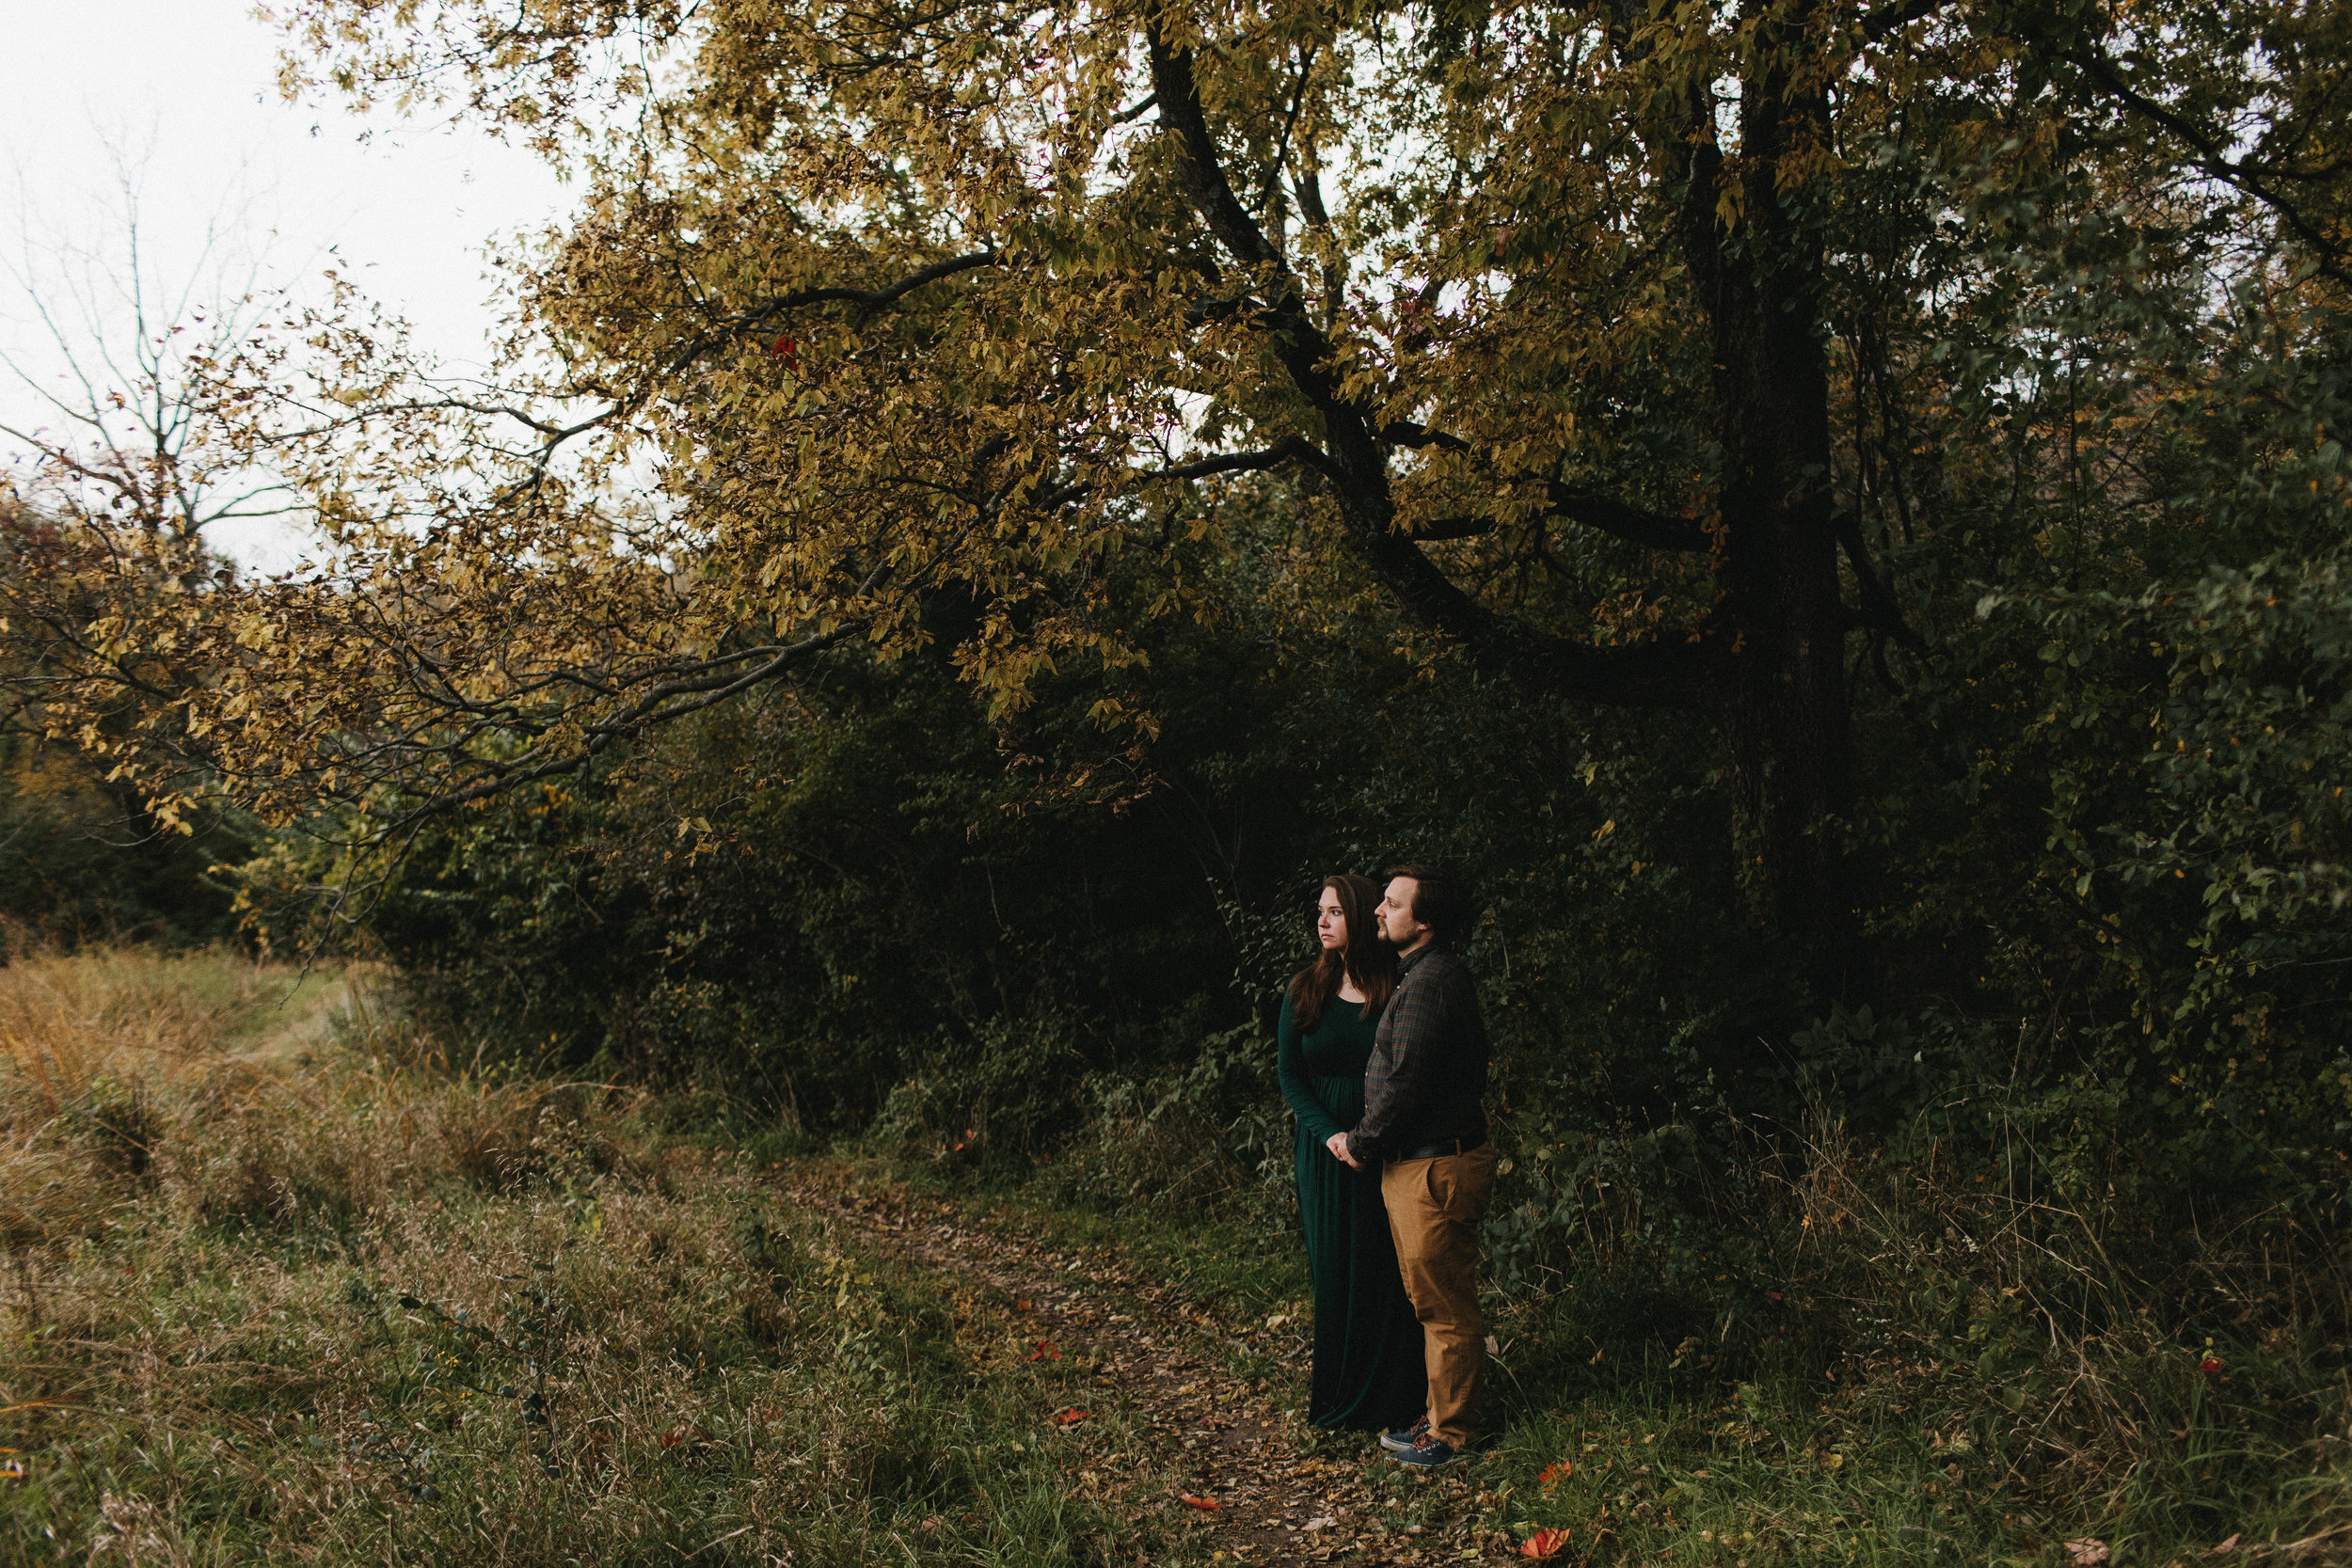 iowa_city_engagement_adventure_prairie_graduate_at_home_dog_couples_downtown_wilsons_orchard_1280.jpg